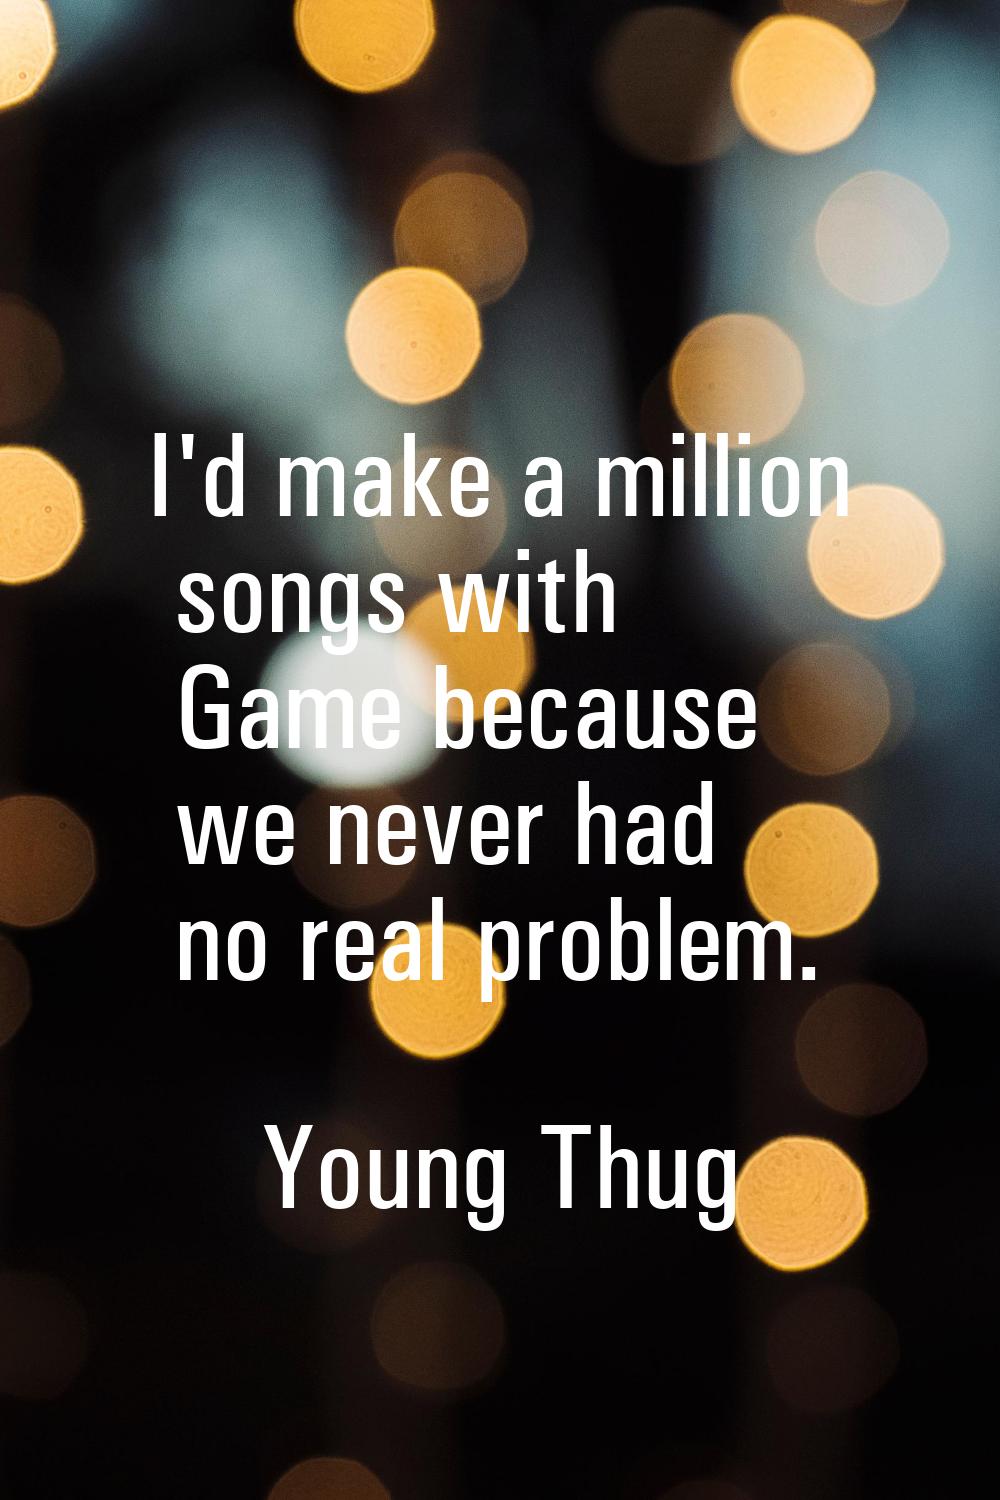 I'd make a million songs with Game because we never had no real problem.